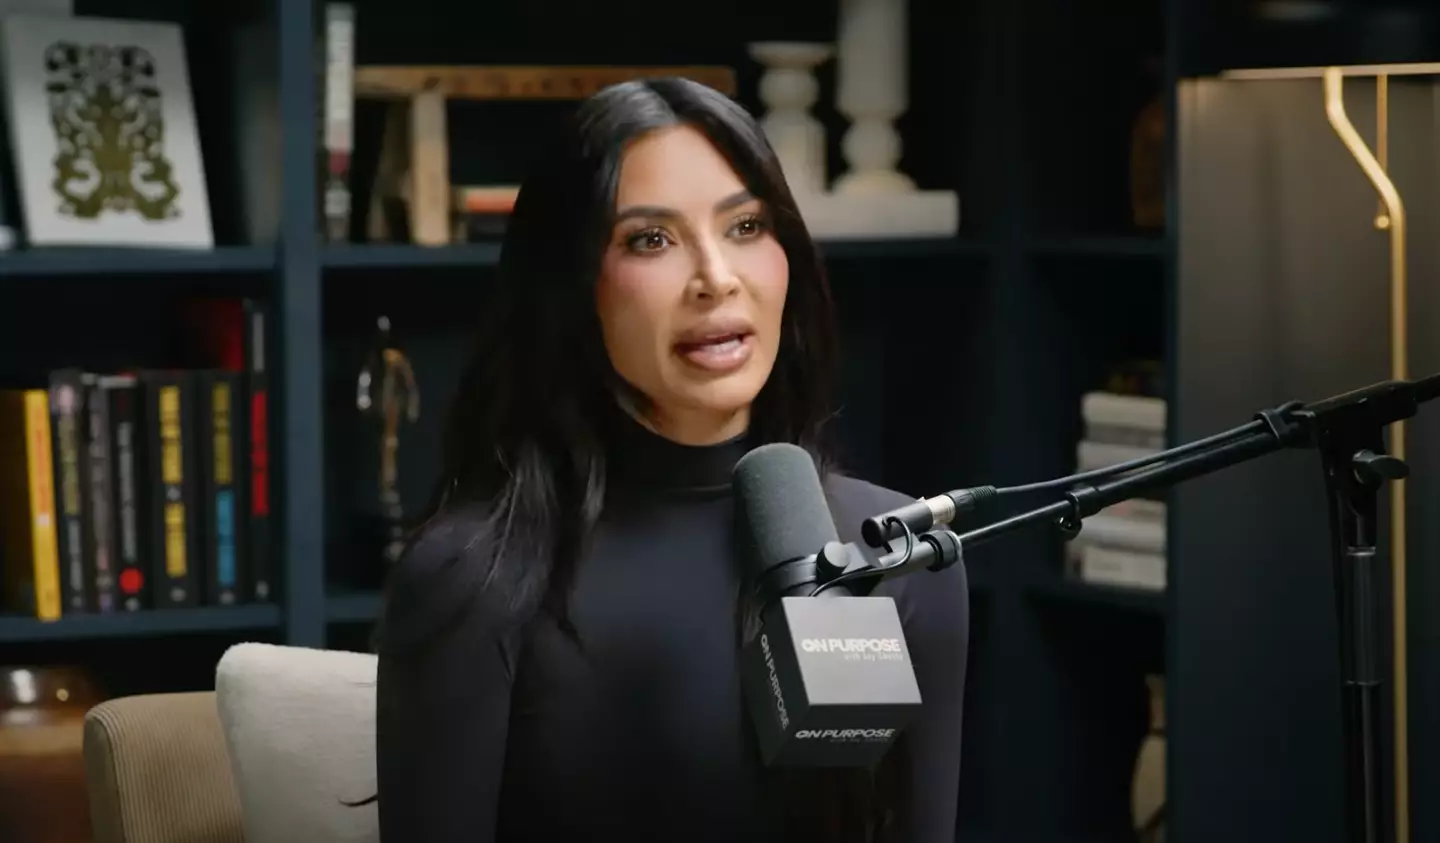 Kardashian discussed her love life on the latest episode of the On Purpose with Jay Shetty podcast.